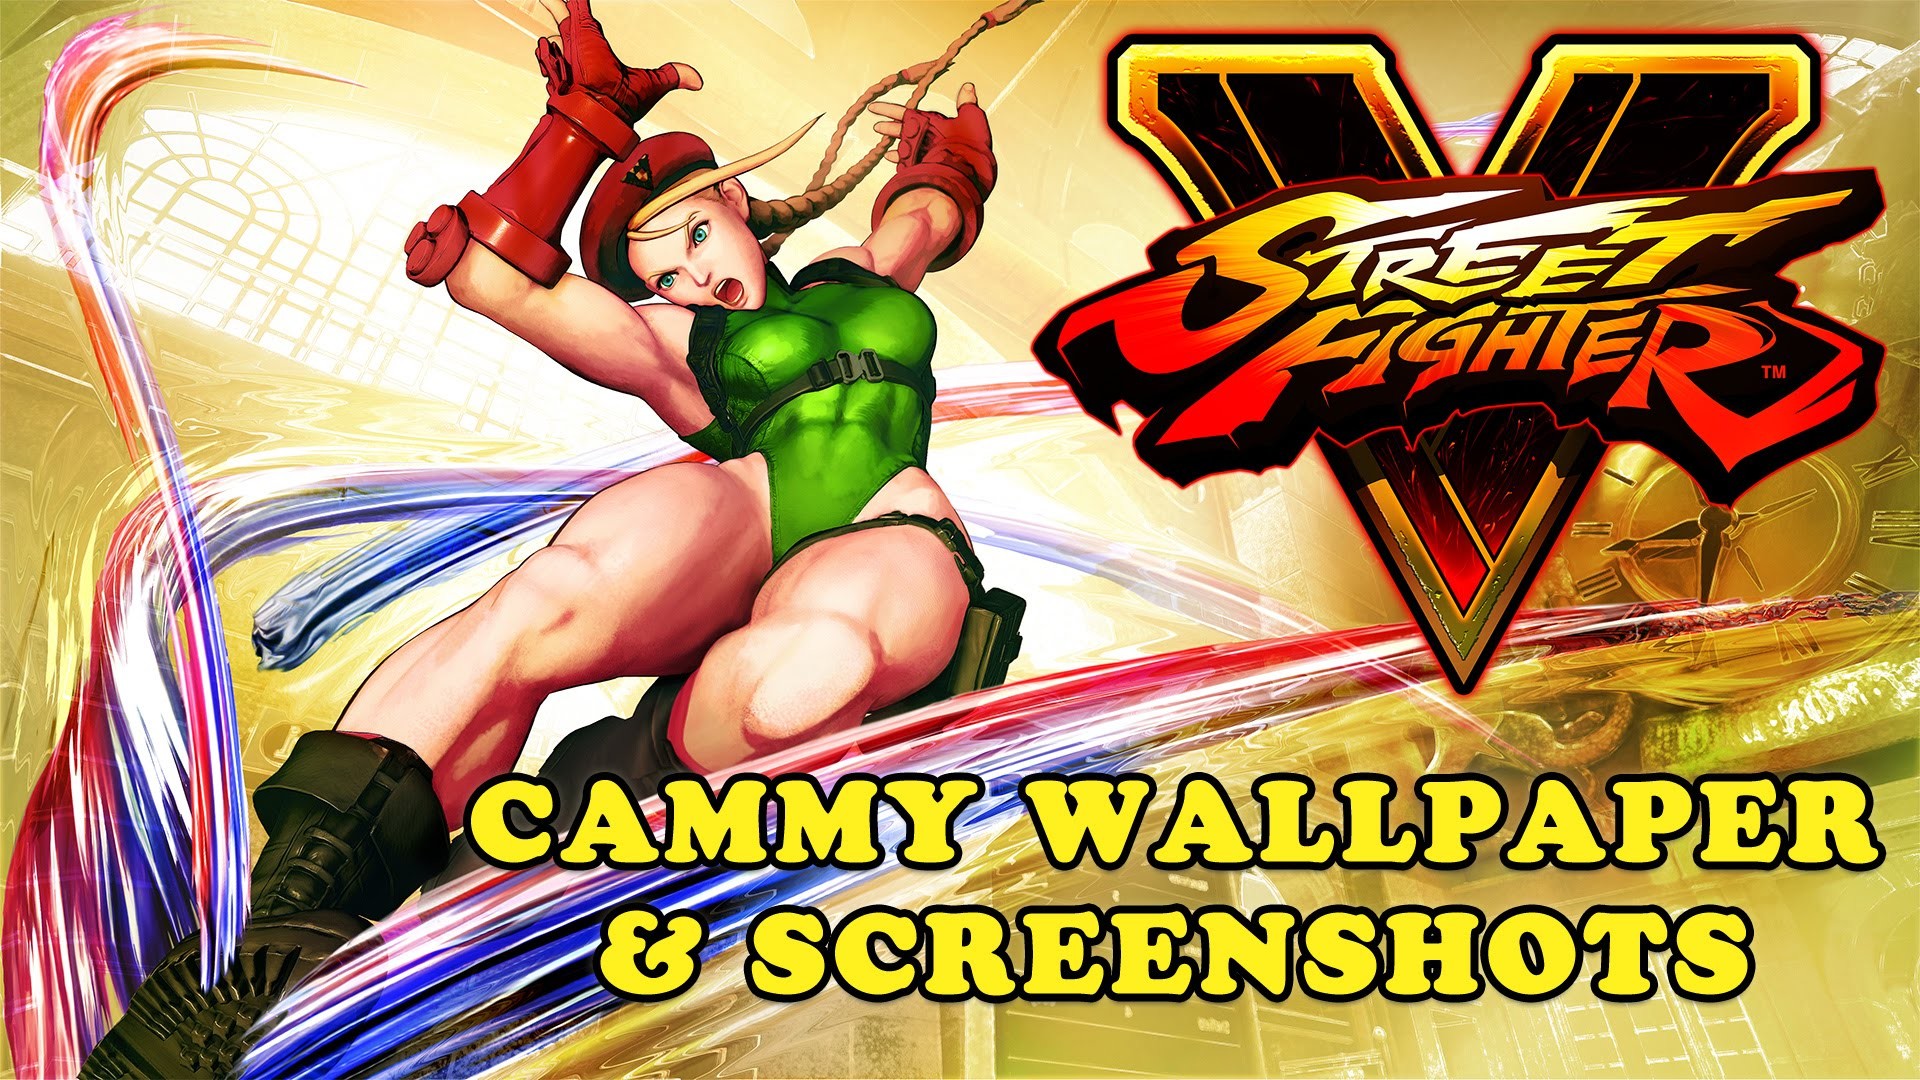 1920x1080 Street Fighter V - Cammy Wallpaper and Screenshots (Download Link) - YouTube